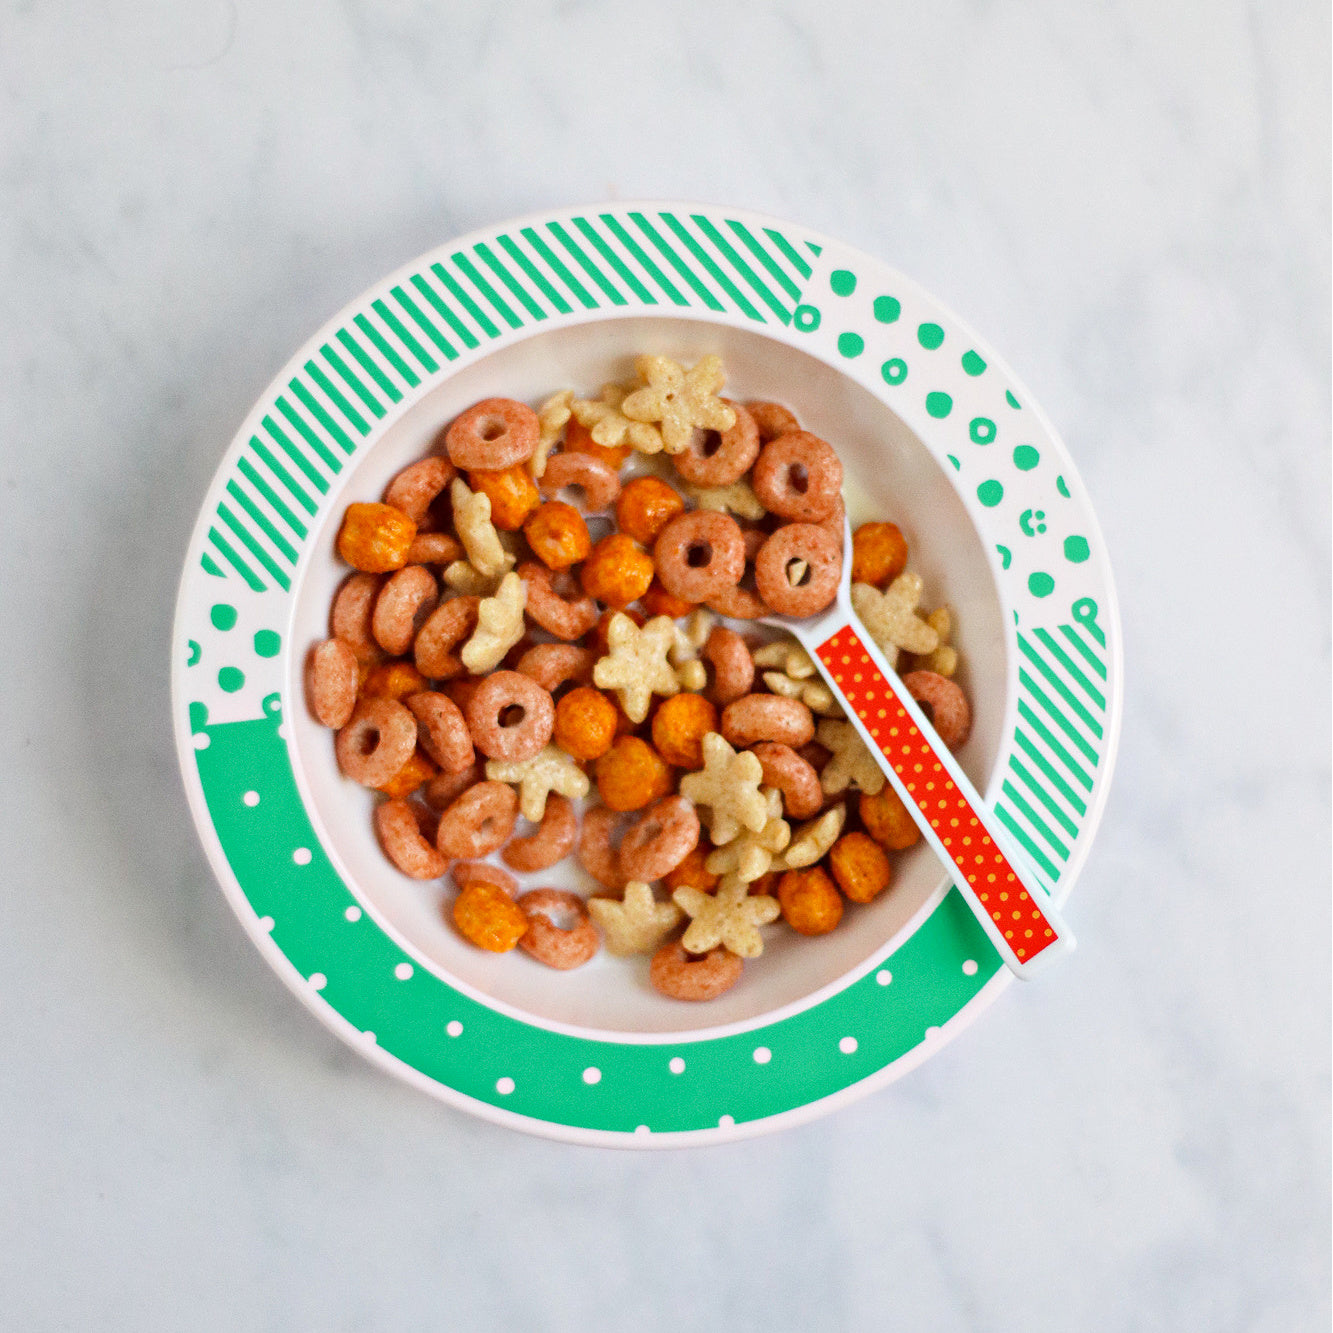 white and green patterned melamine bowl containing cereal and milk with a brightly coloured kids spoon in it.